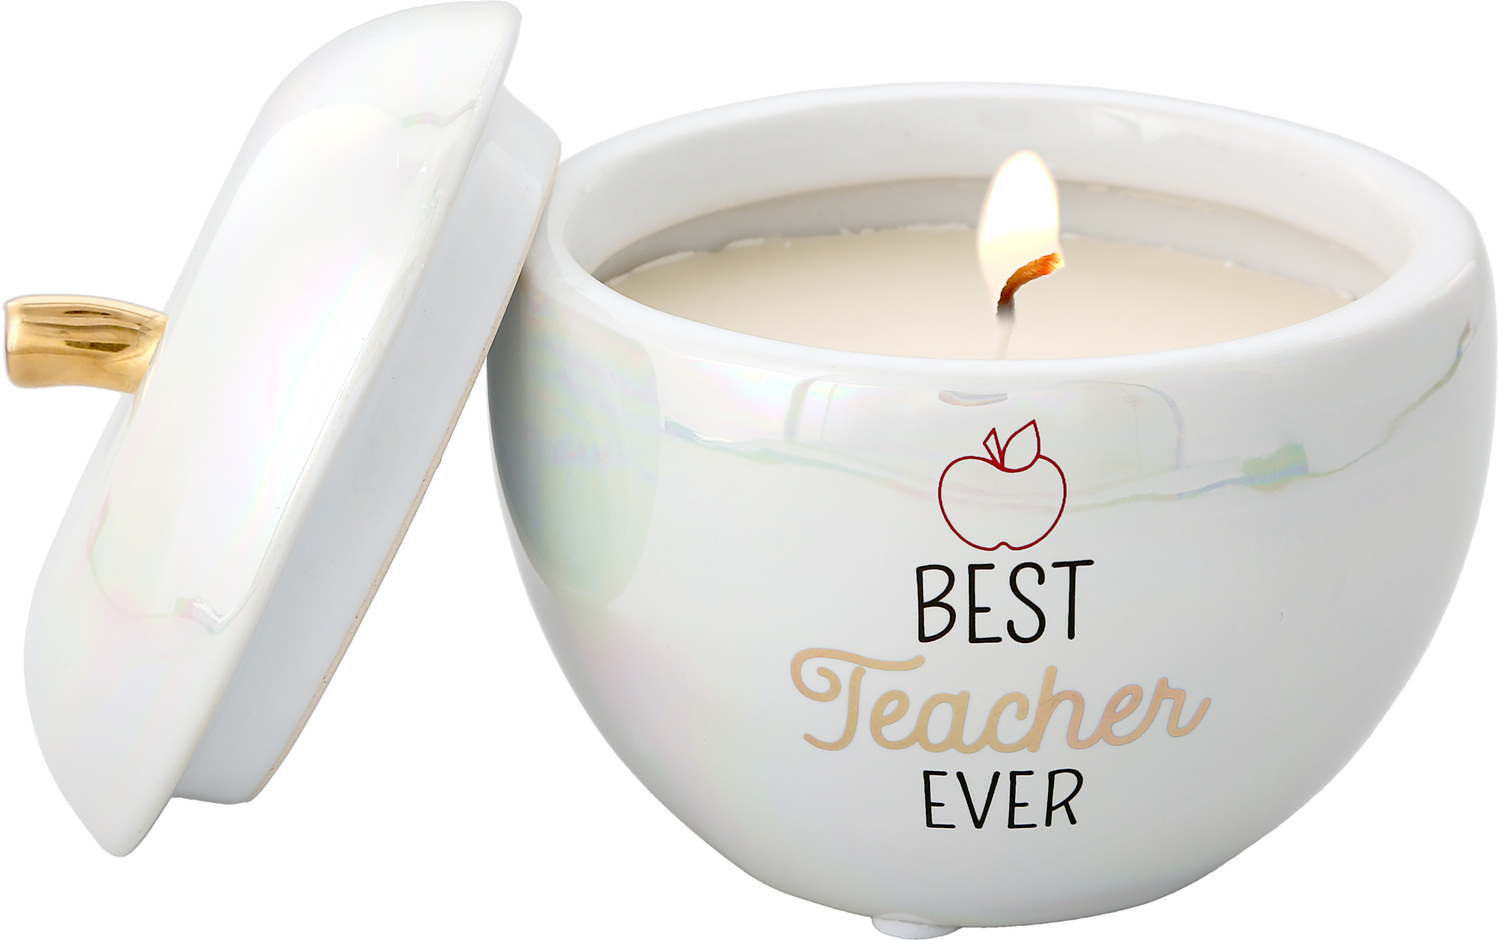 Best Teacher Ever by Teachable Moments - Best Teacher Ever - 8 oz. 100% Soy Wax Candle
Scent: Serenity